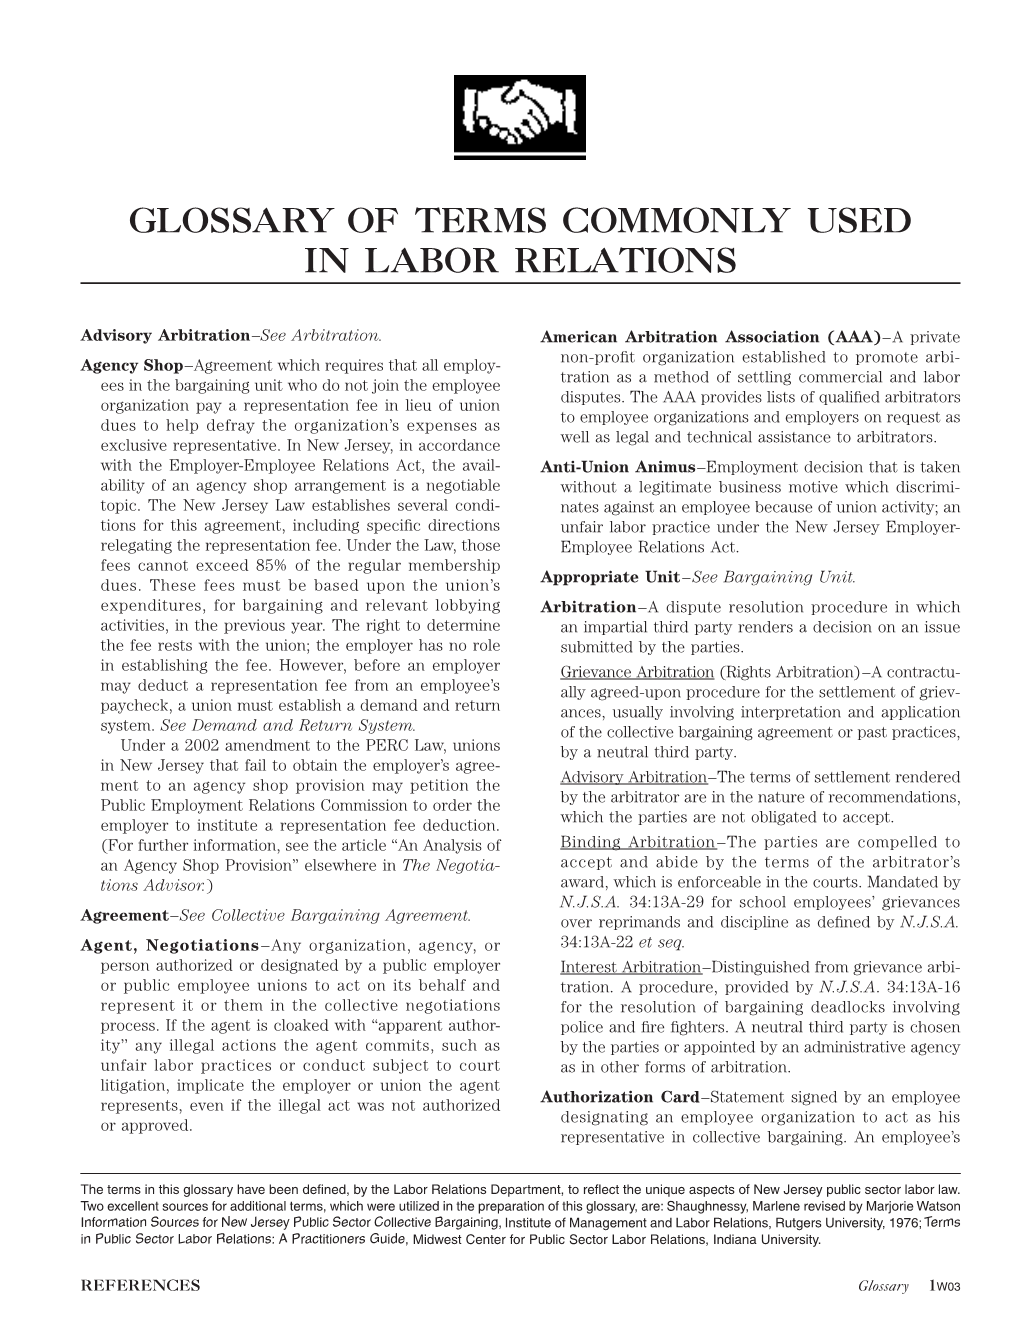 Glossary of Terms Commonly Used in Labor Relations